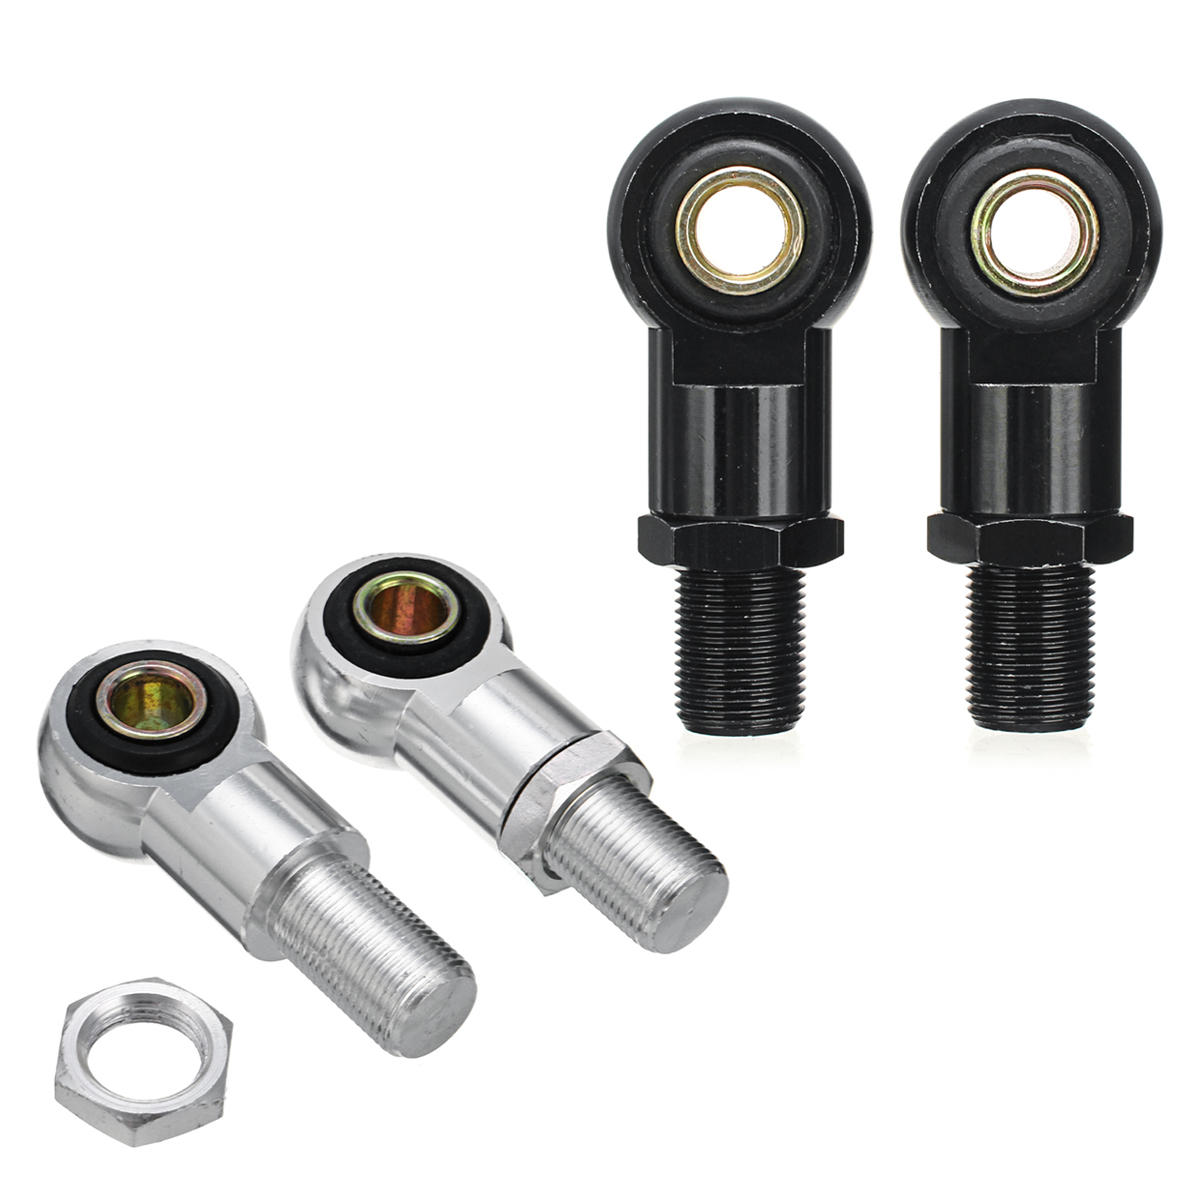 1 Pair 10mm Eye Adapter Eye End For Motorcycle Scooter Shock Absorber Sliver